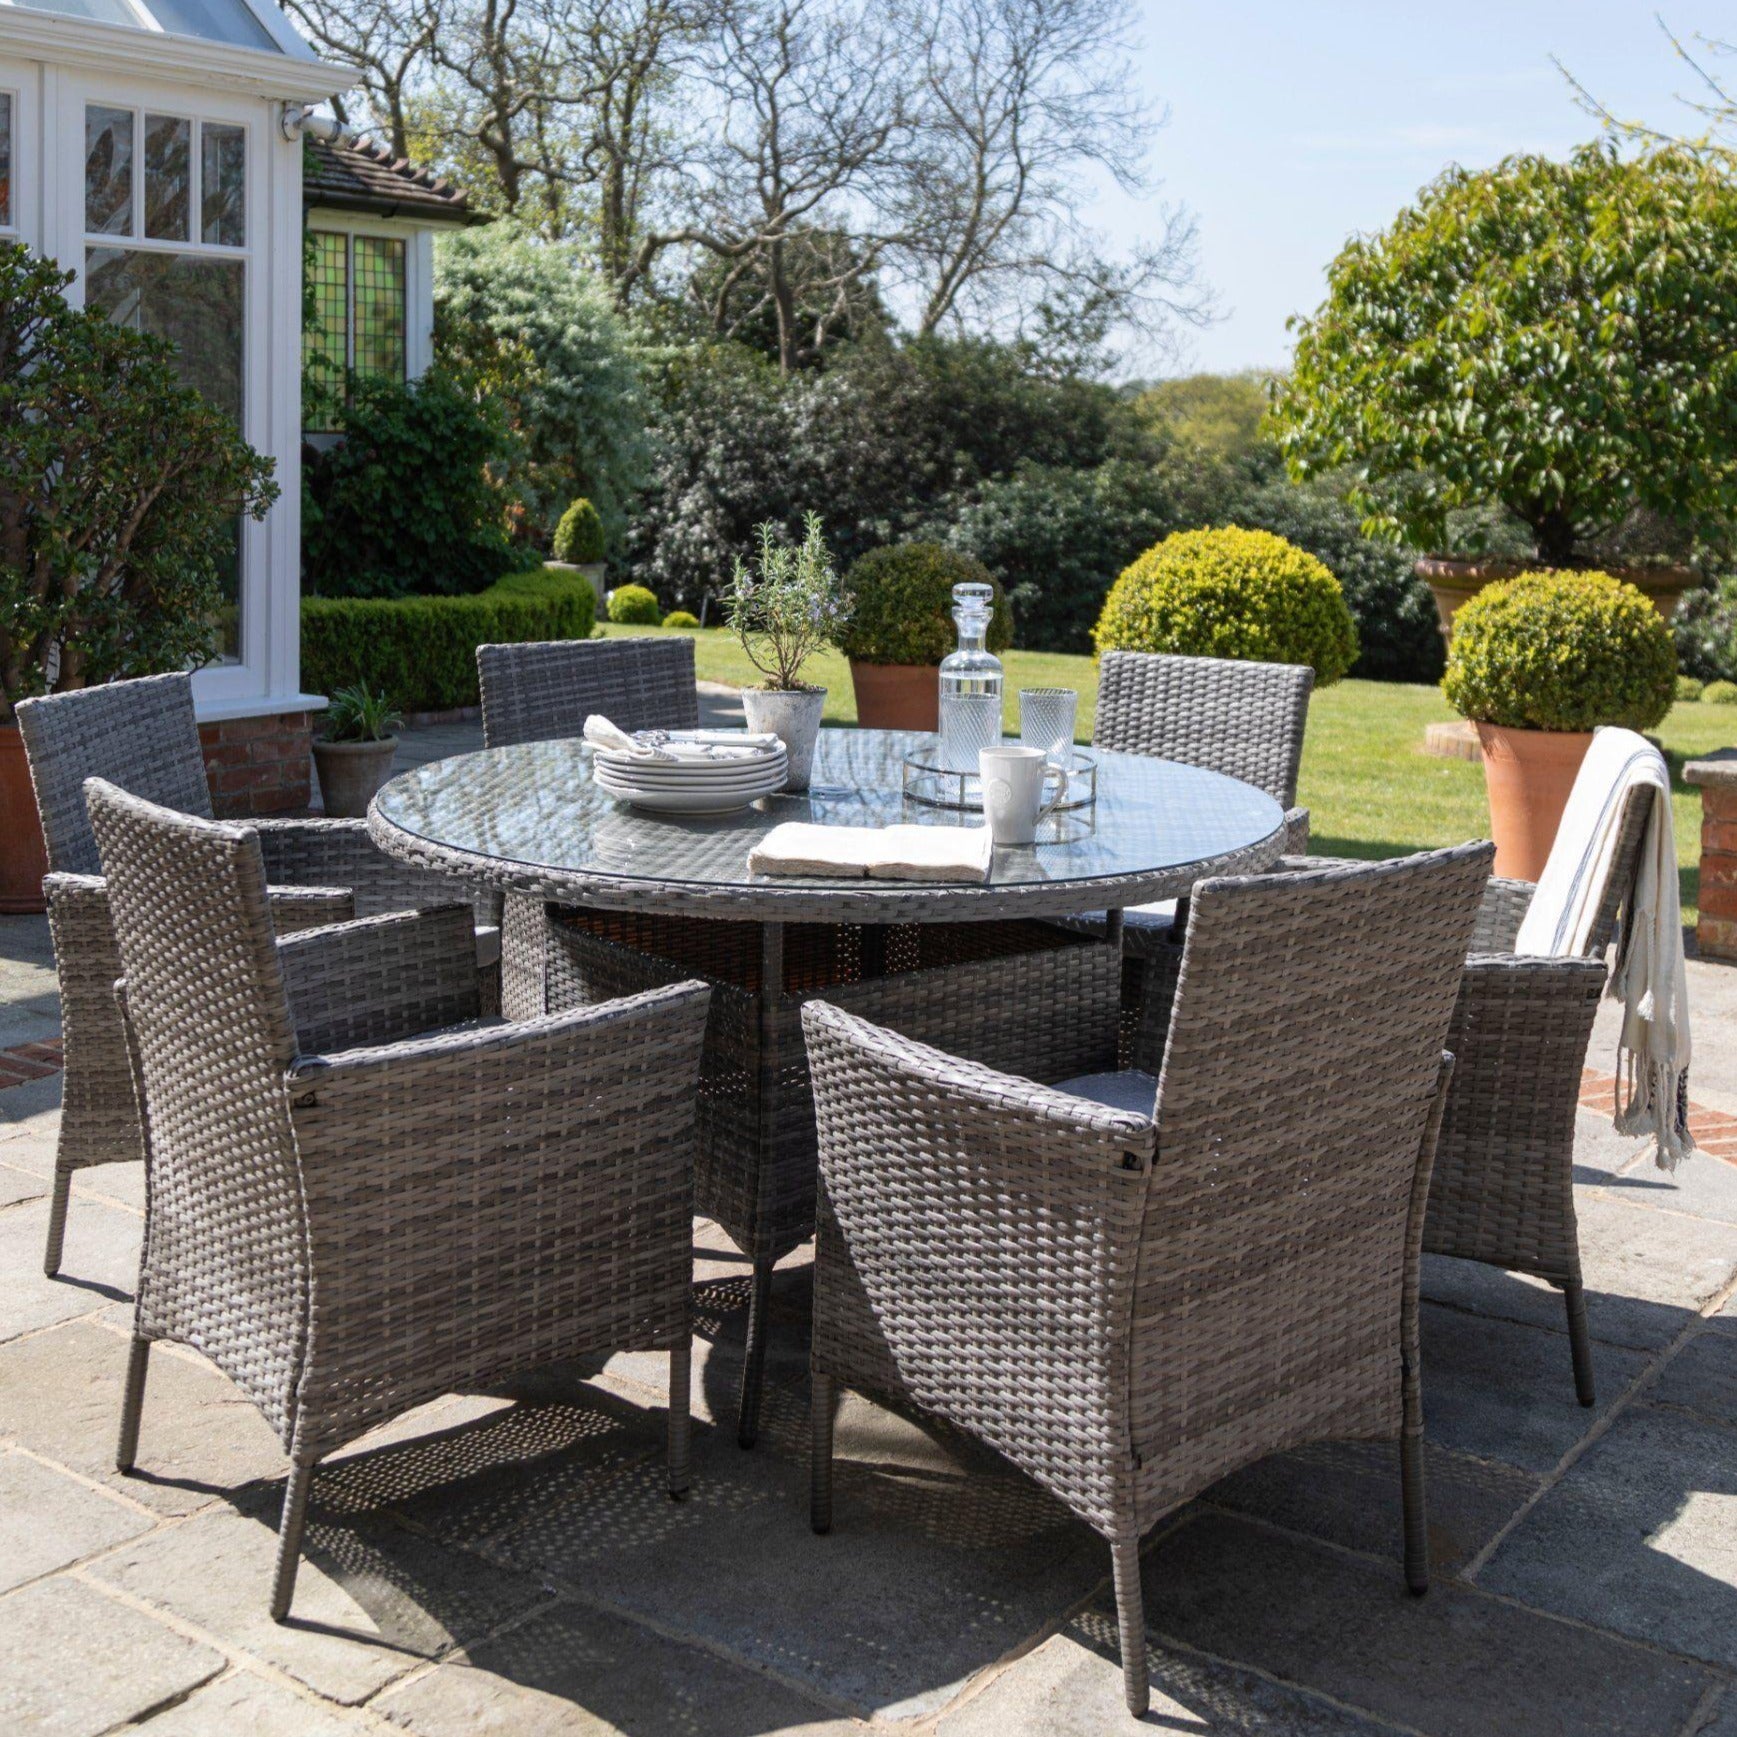 6 Seater Rattan Dining Table Set in Grey - Garden Furniture Outdoor  - Laura James